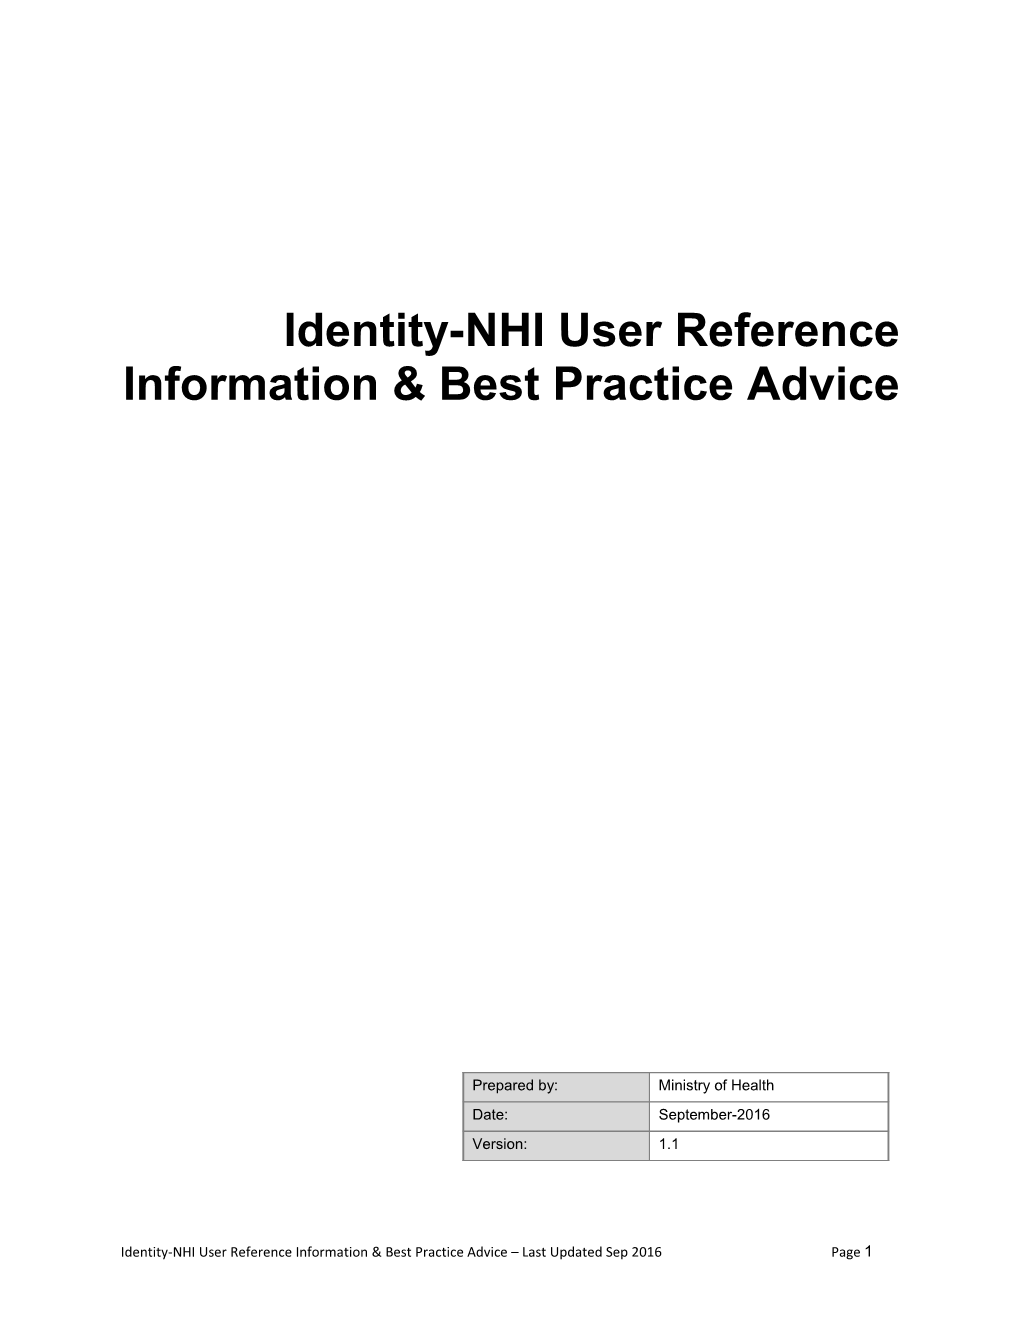 Identity-NHI User Reference Information & Best Practice Advice